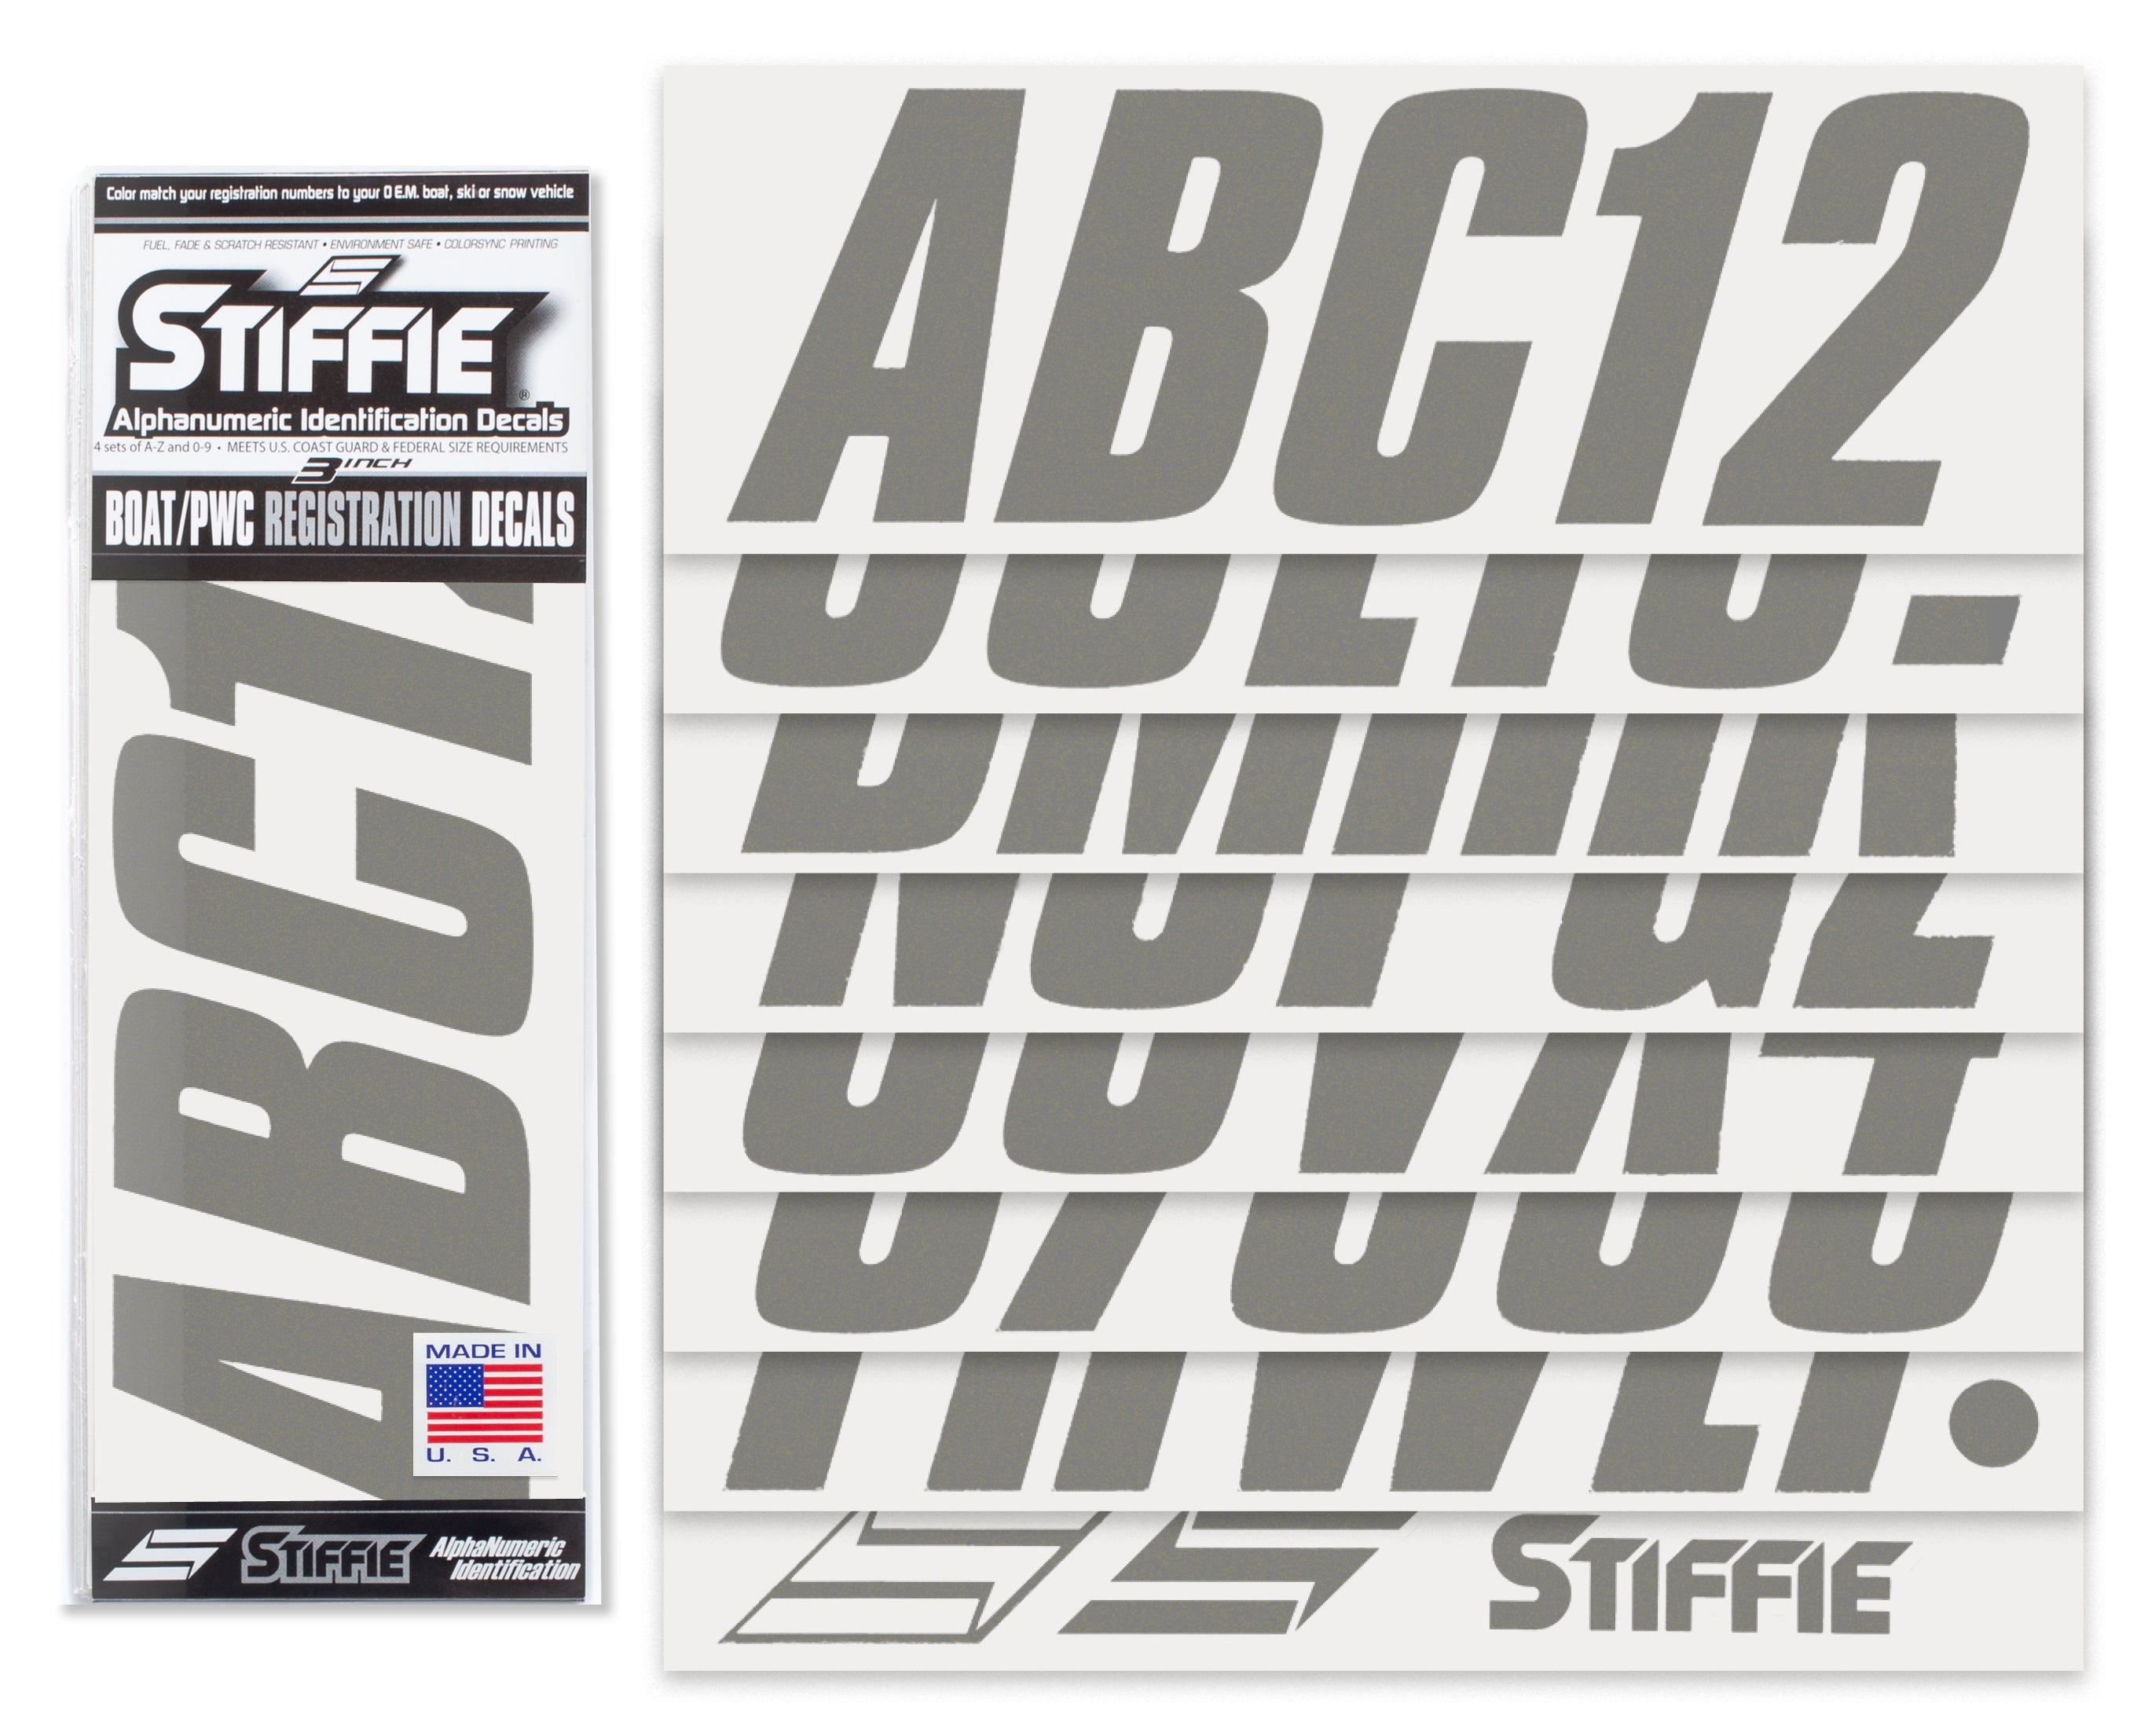 STIFFIE Shift Carbon 3" ID Kit Alpha-Numeric Registration Identification Numbers Stickers Decals for Boats & Personal Watercraft